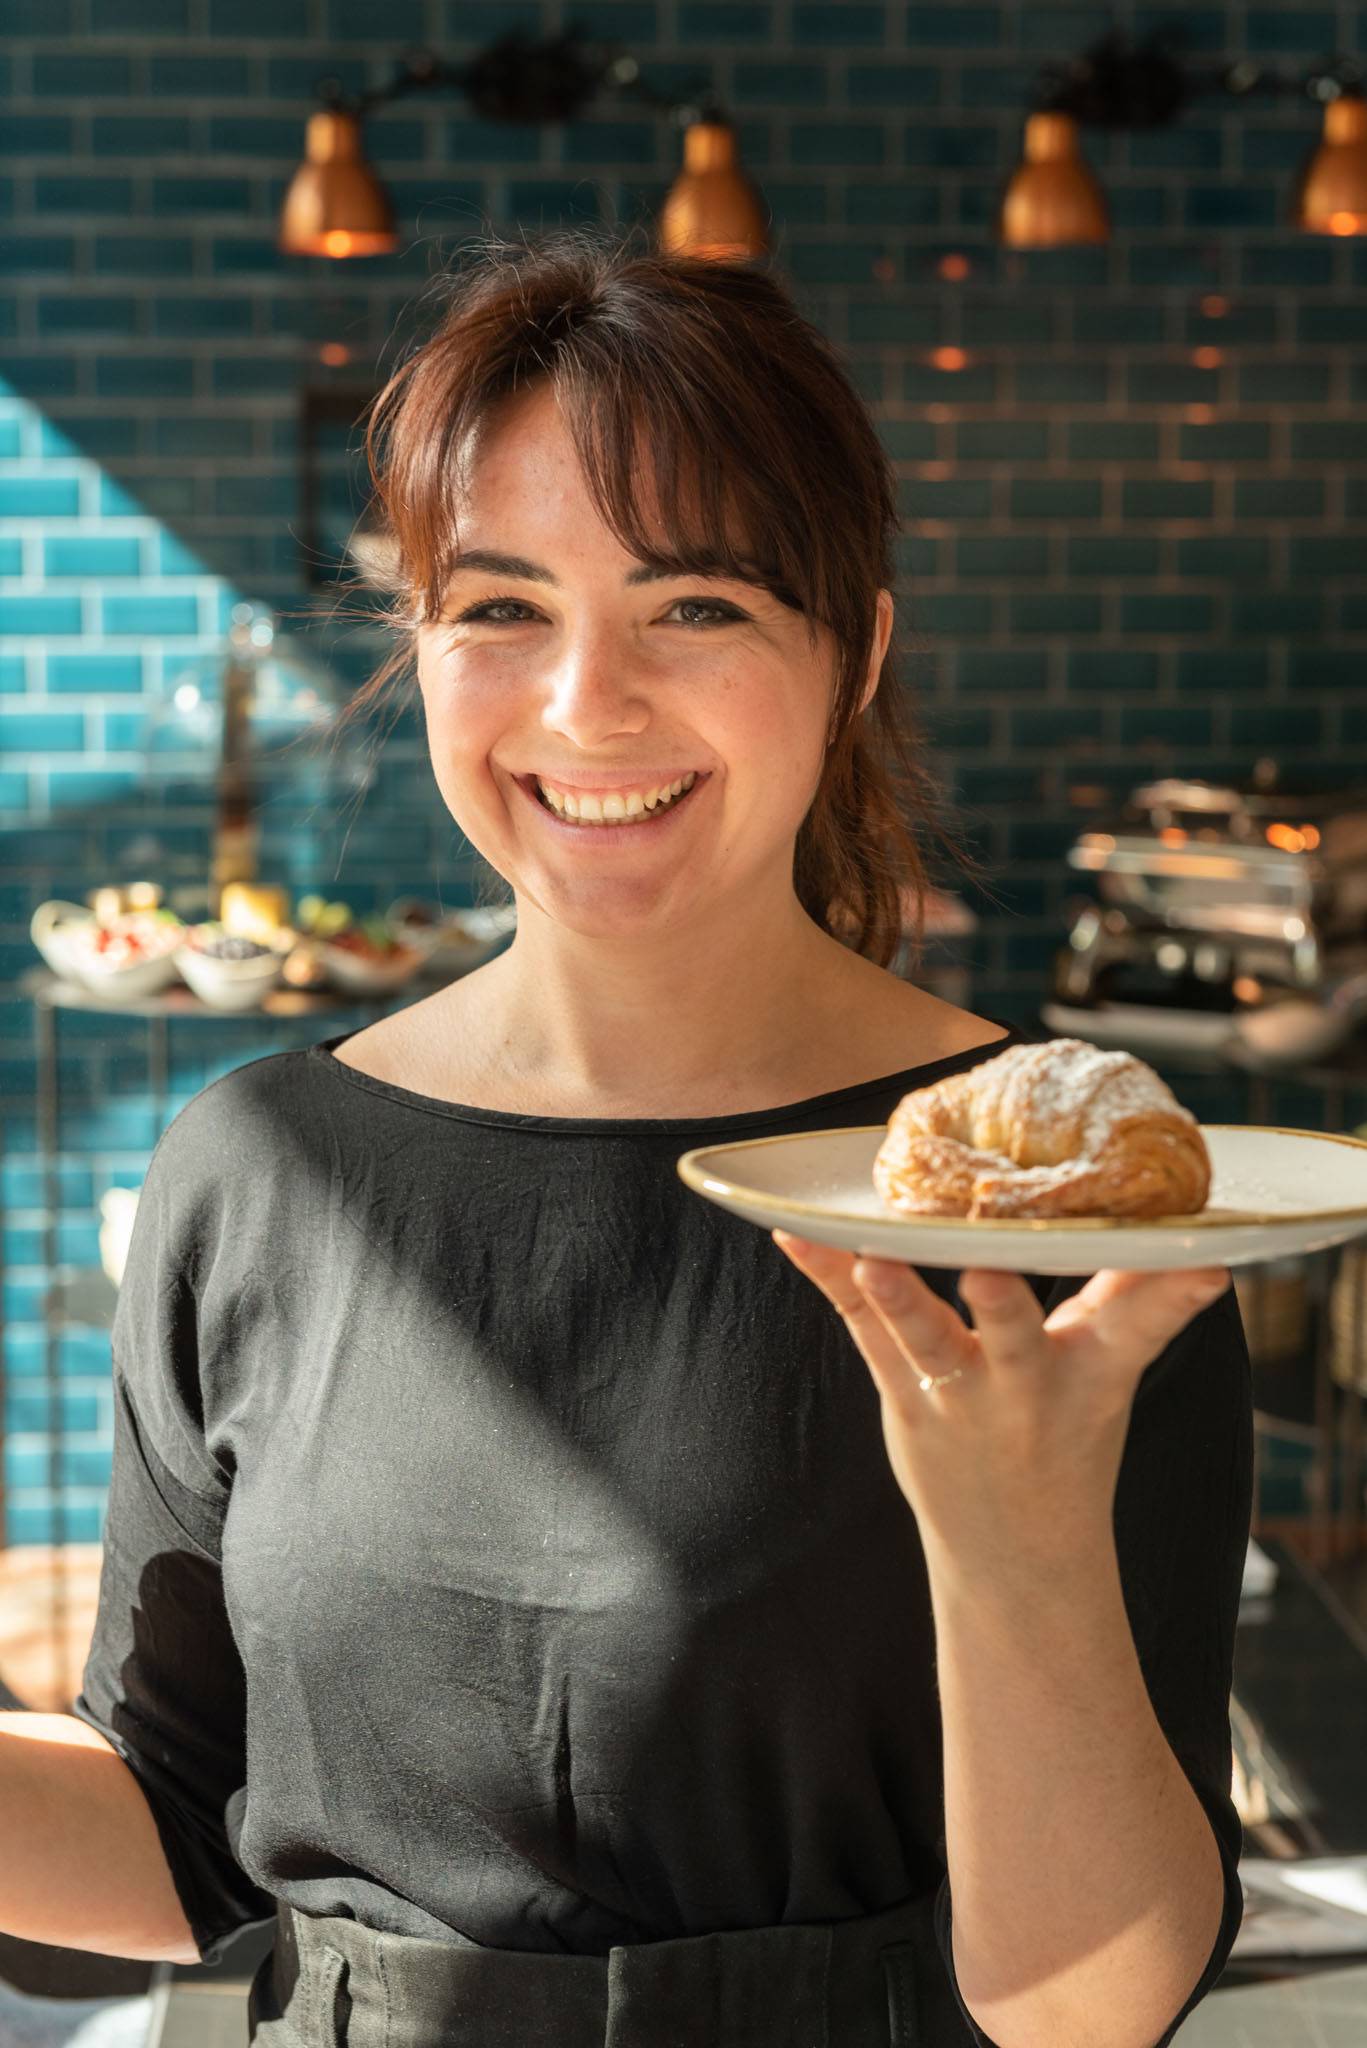 Waitress holding plate with croissant